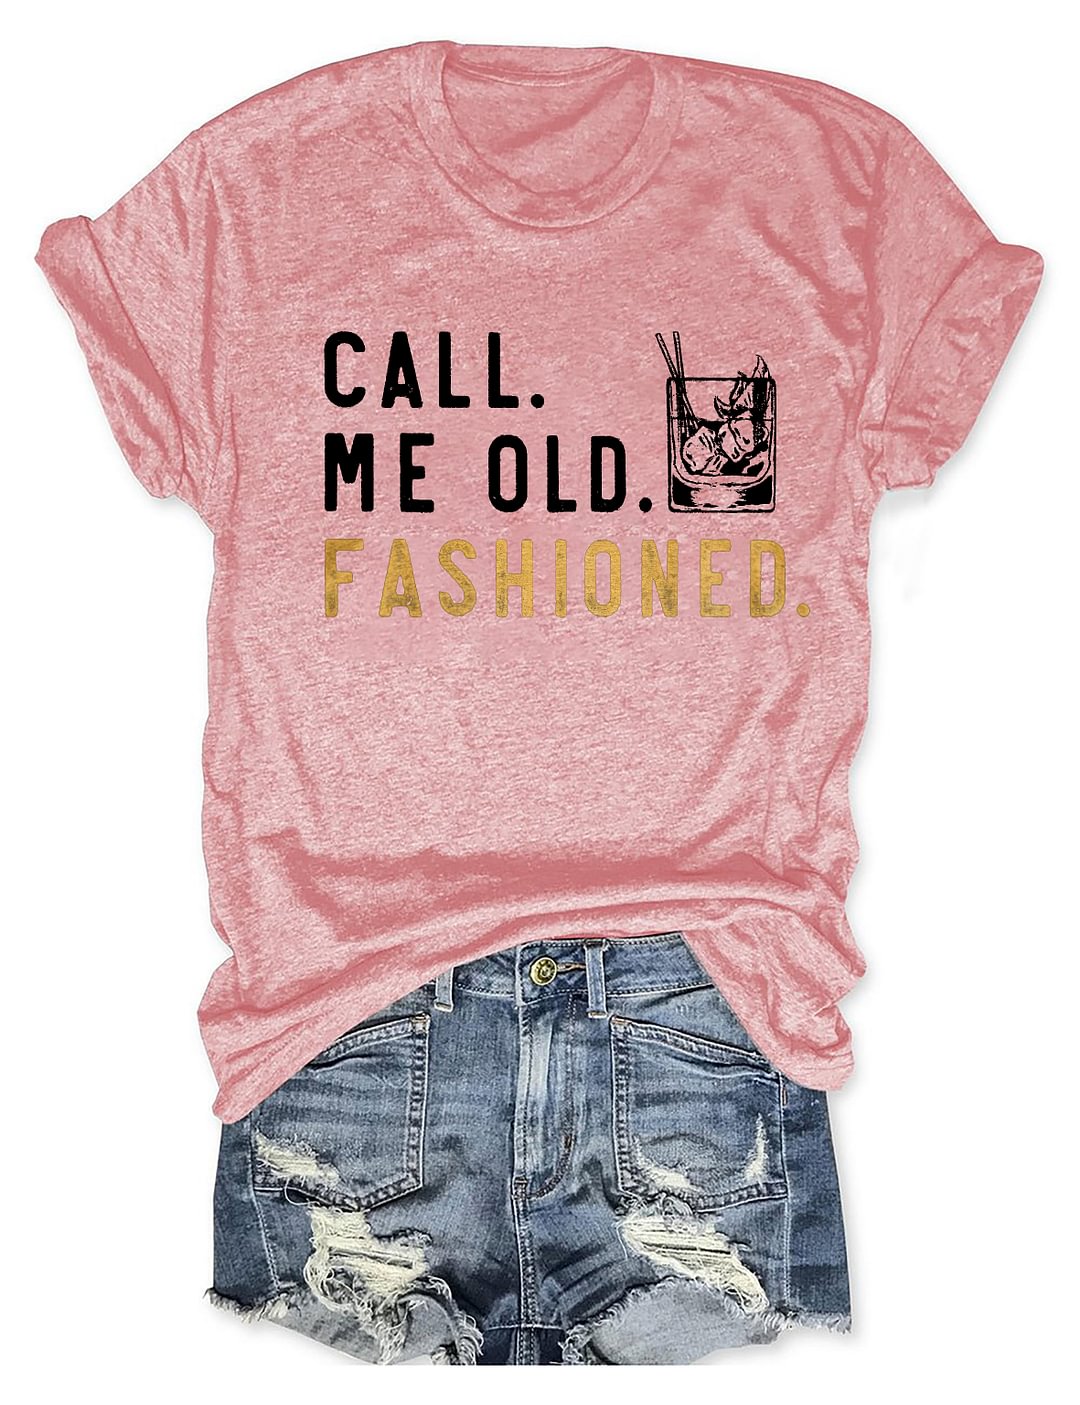 Call Me Old Fashioned T-shirt